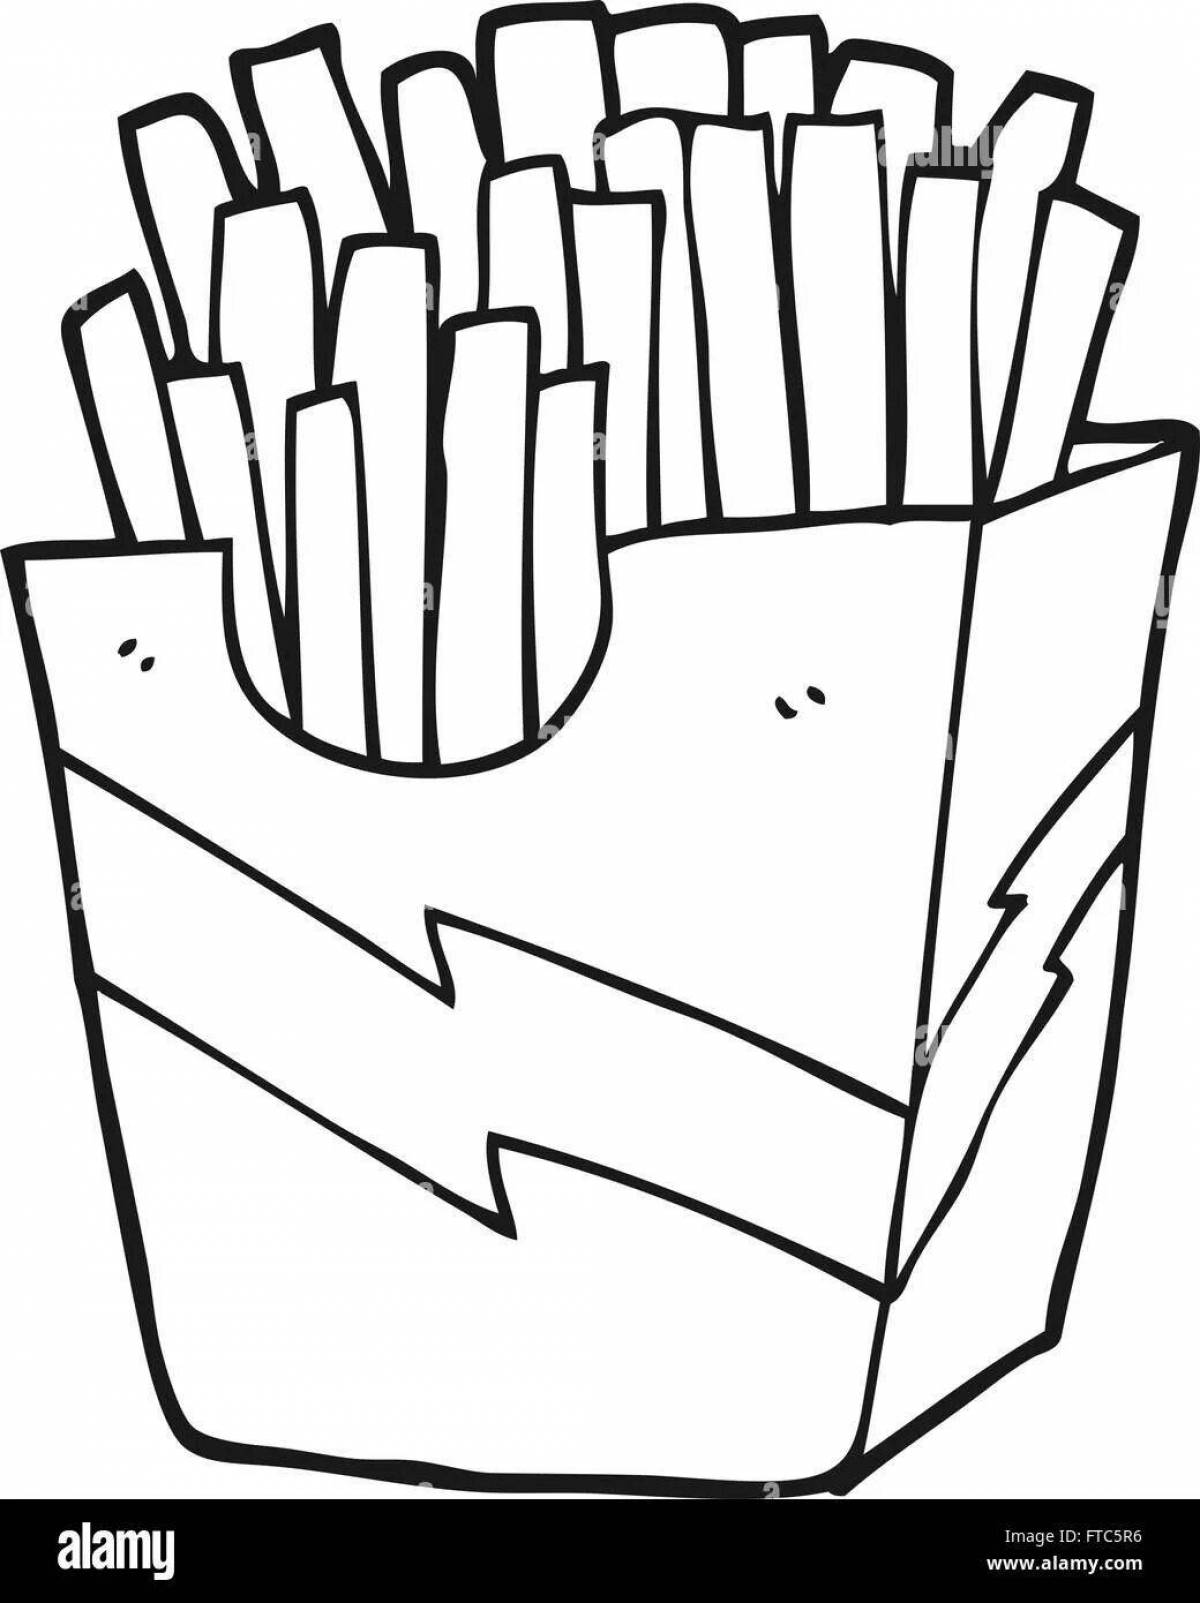 Inspirational french fries coloring book for kids